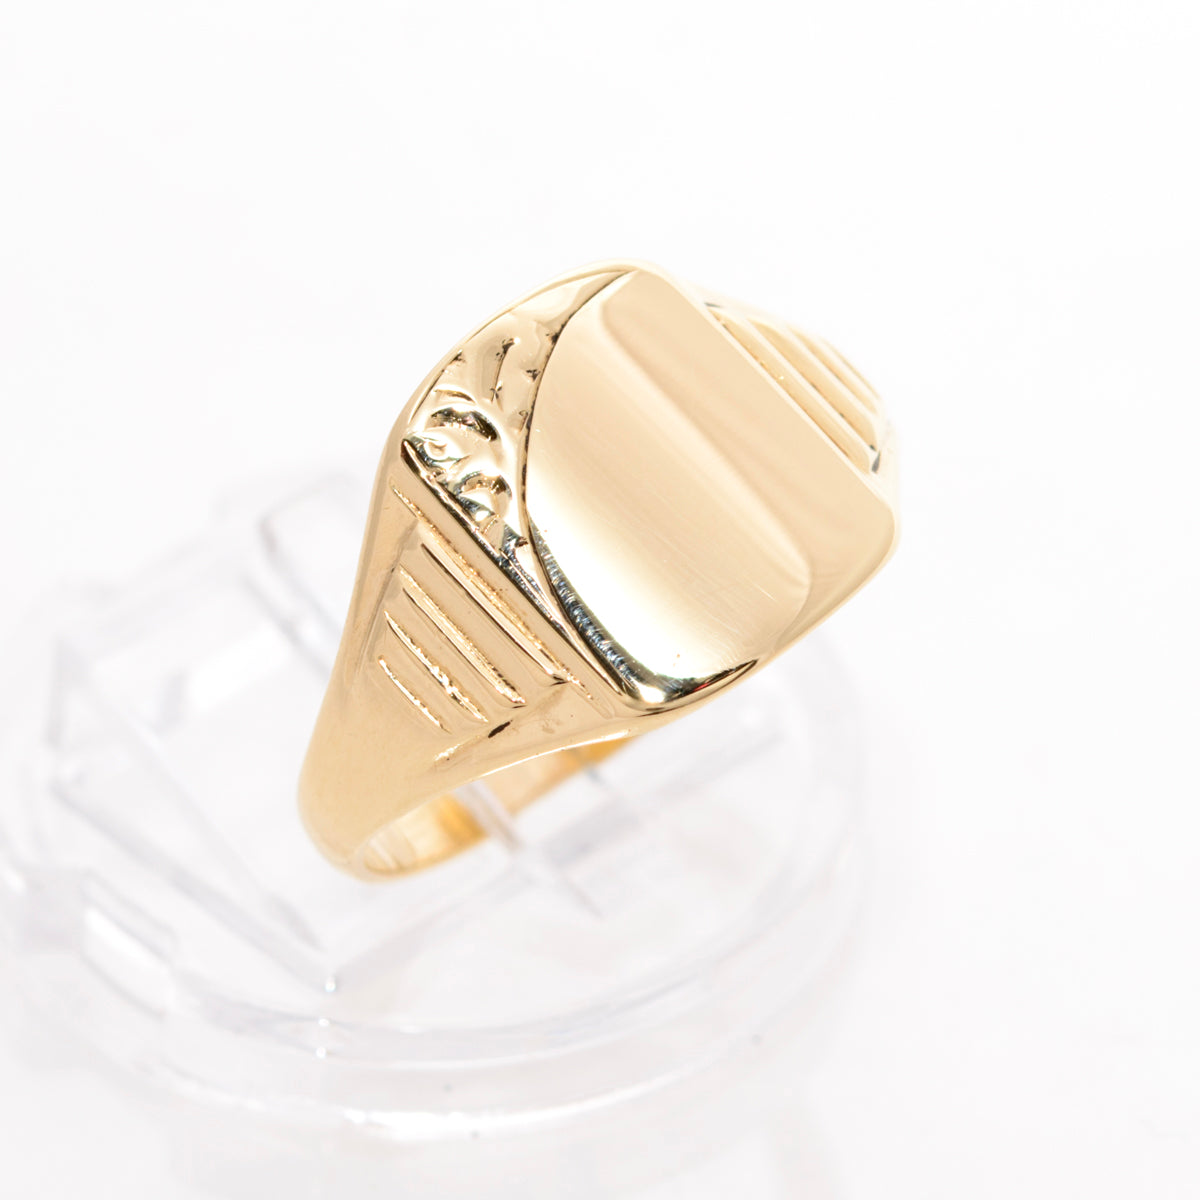 Vintage 9ct Solid Gold Classic Decorative Signet Ring - Unisex UK Size S (A1446)